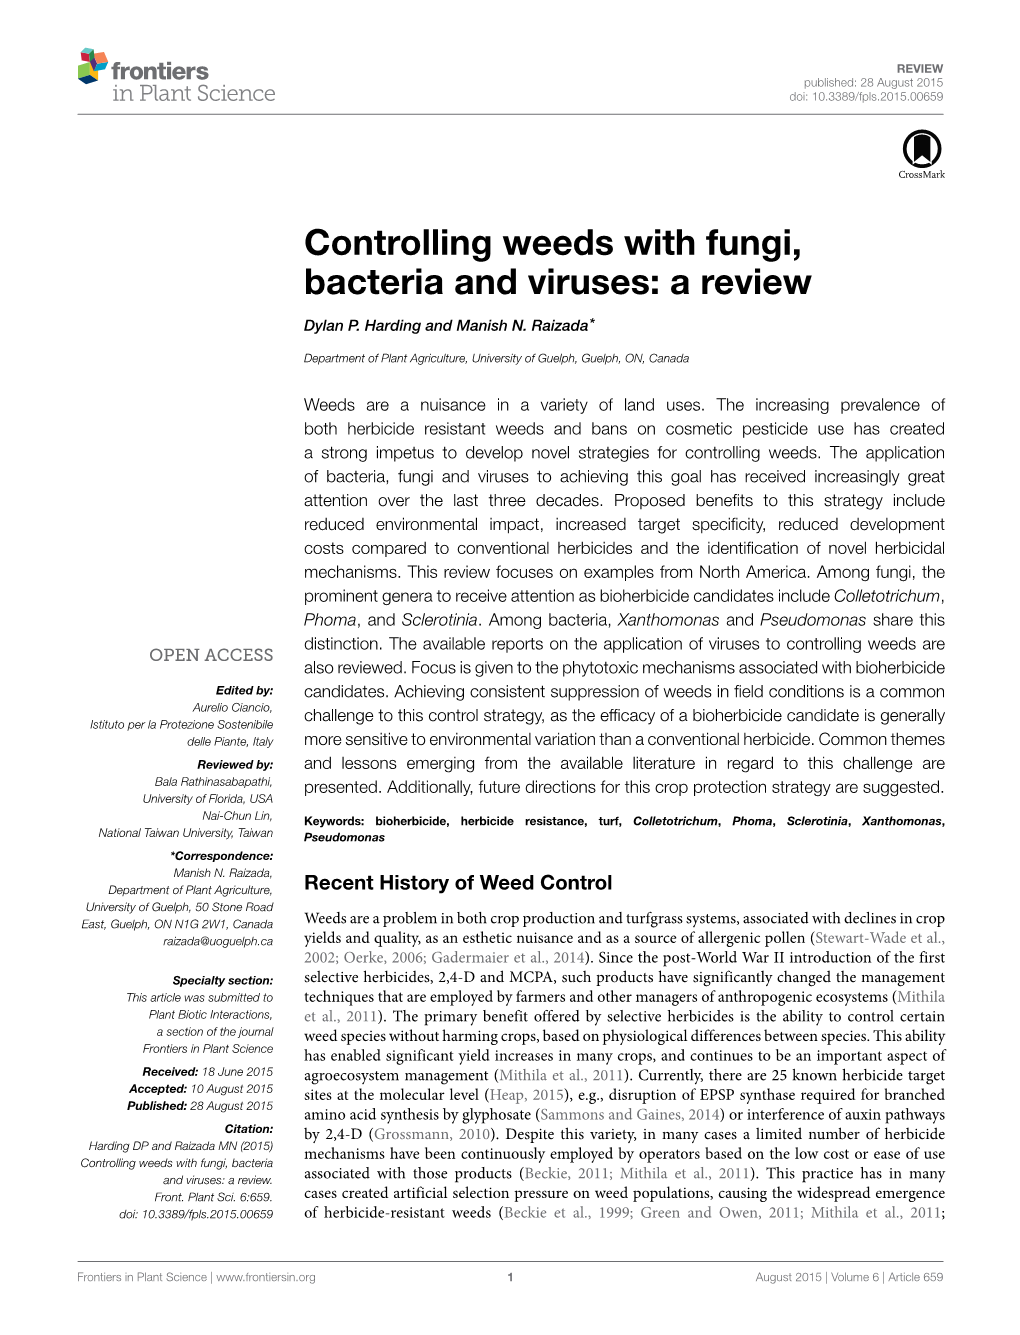 Controlling Weeds with Fungi, Bacteria and Viruses: a Review